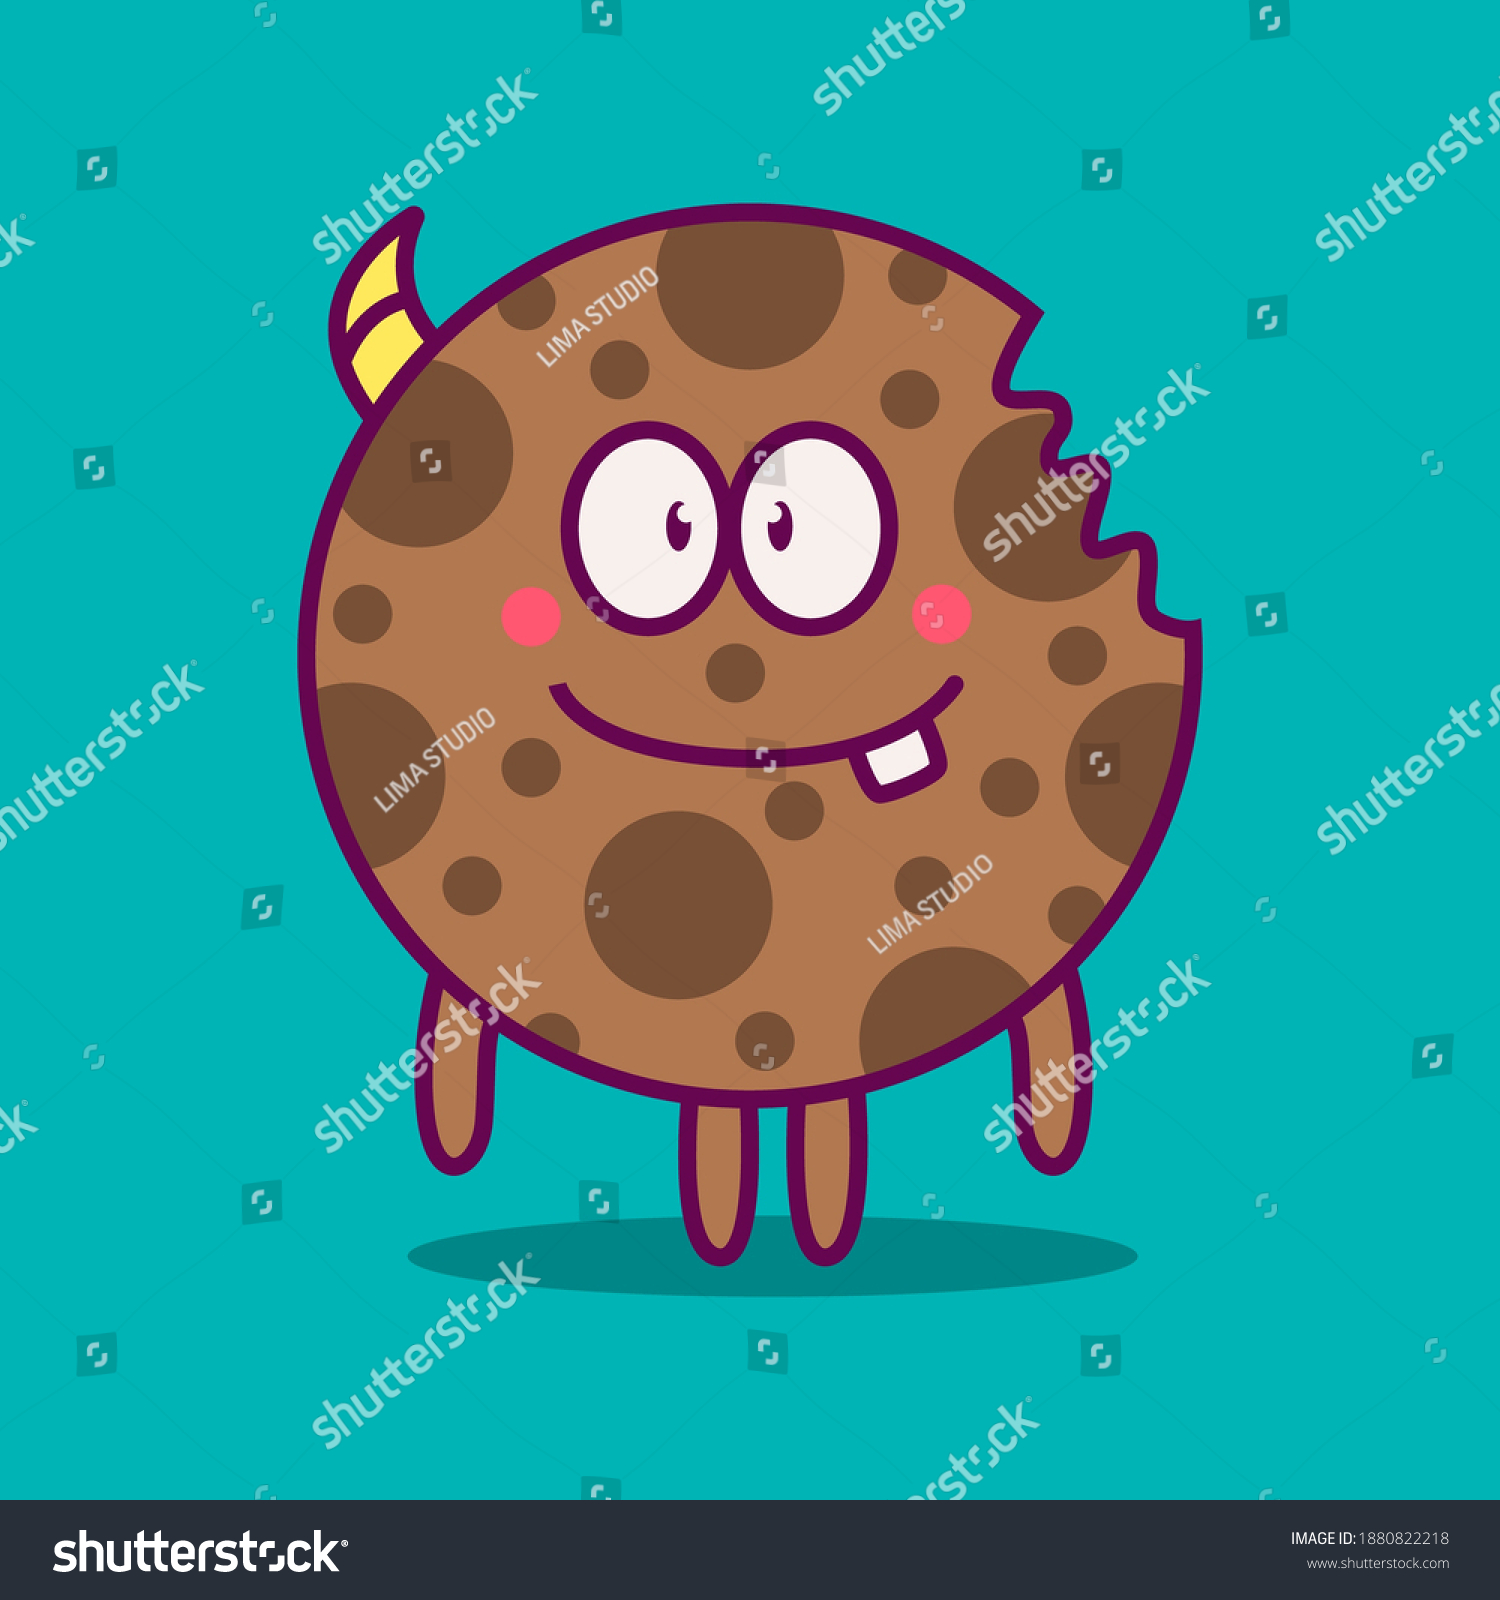 SVG of kawaii doodle monster cartoon designs  for coloring, backgrounds, stickers, logos, icons and more  svg